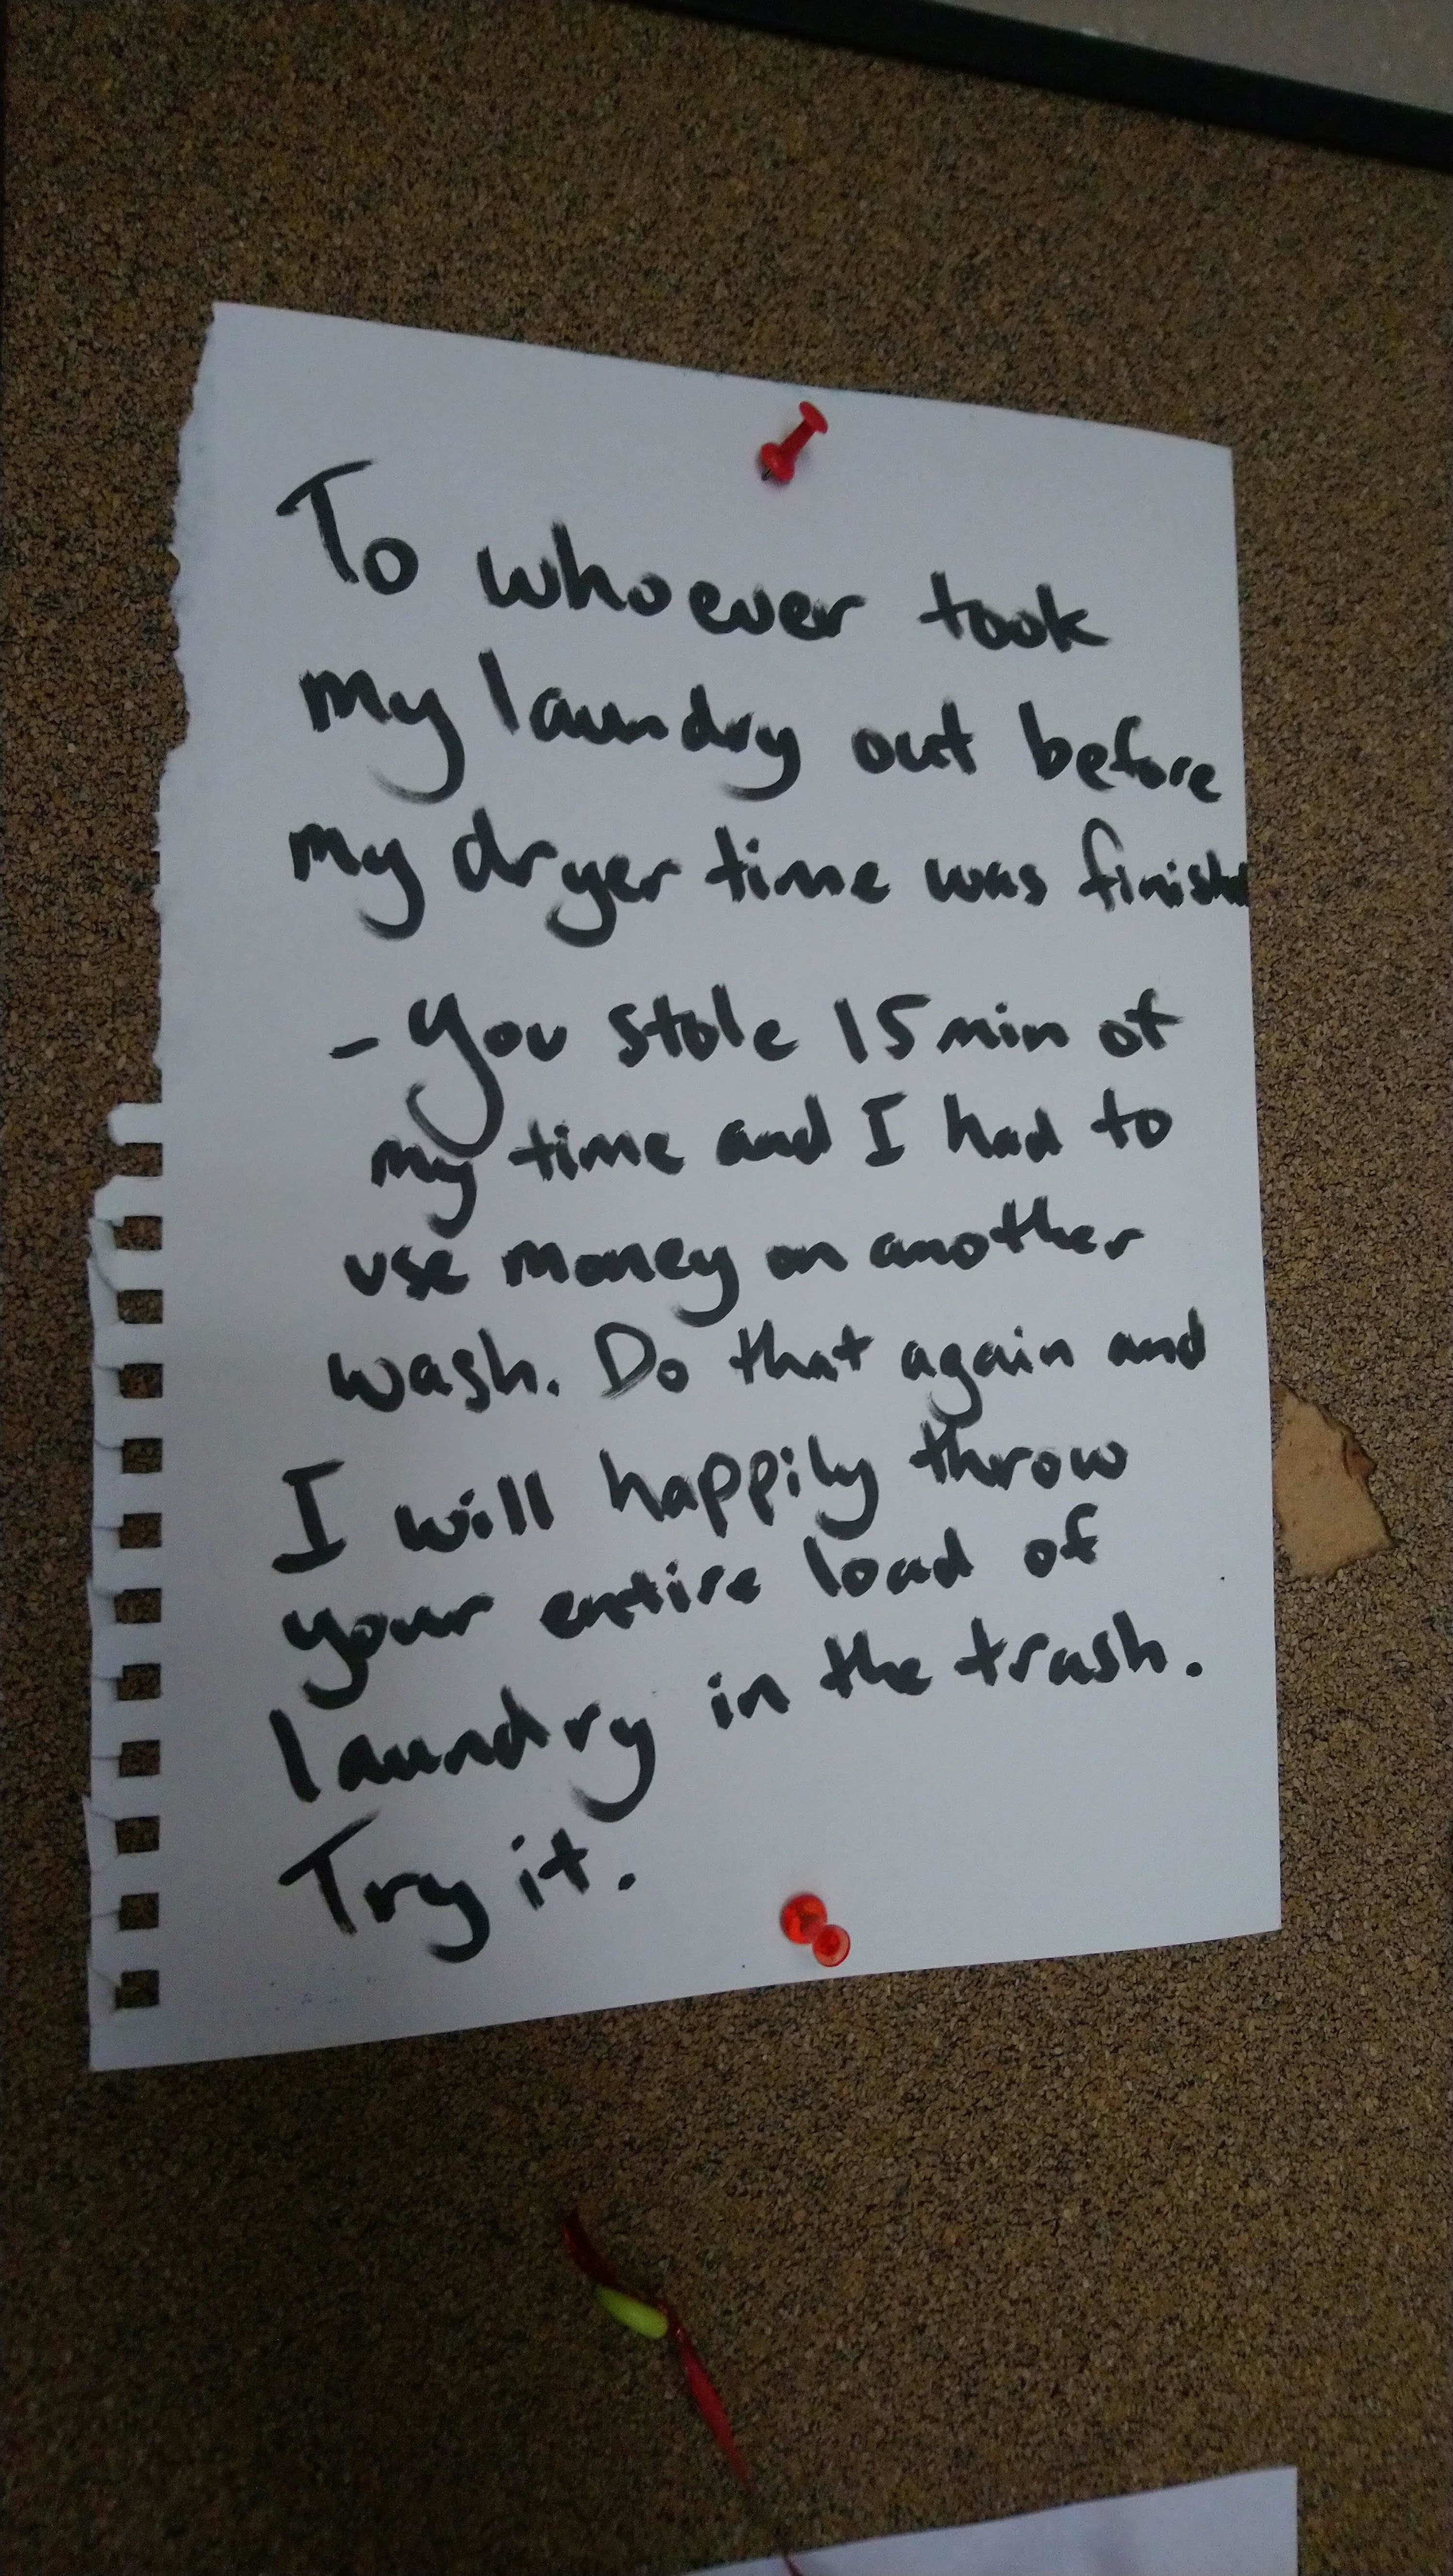 Angry note threatening vengeance on someone who removed their clothes from a dryer 15 minutes before they were done